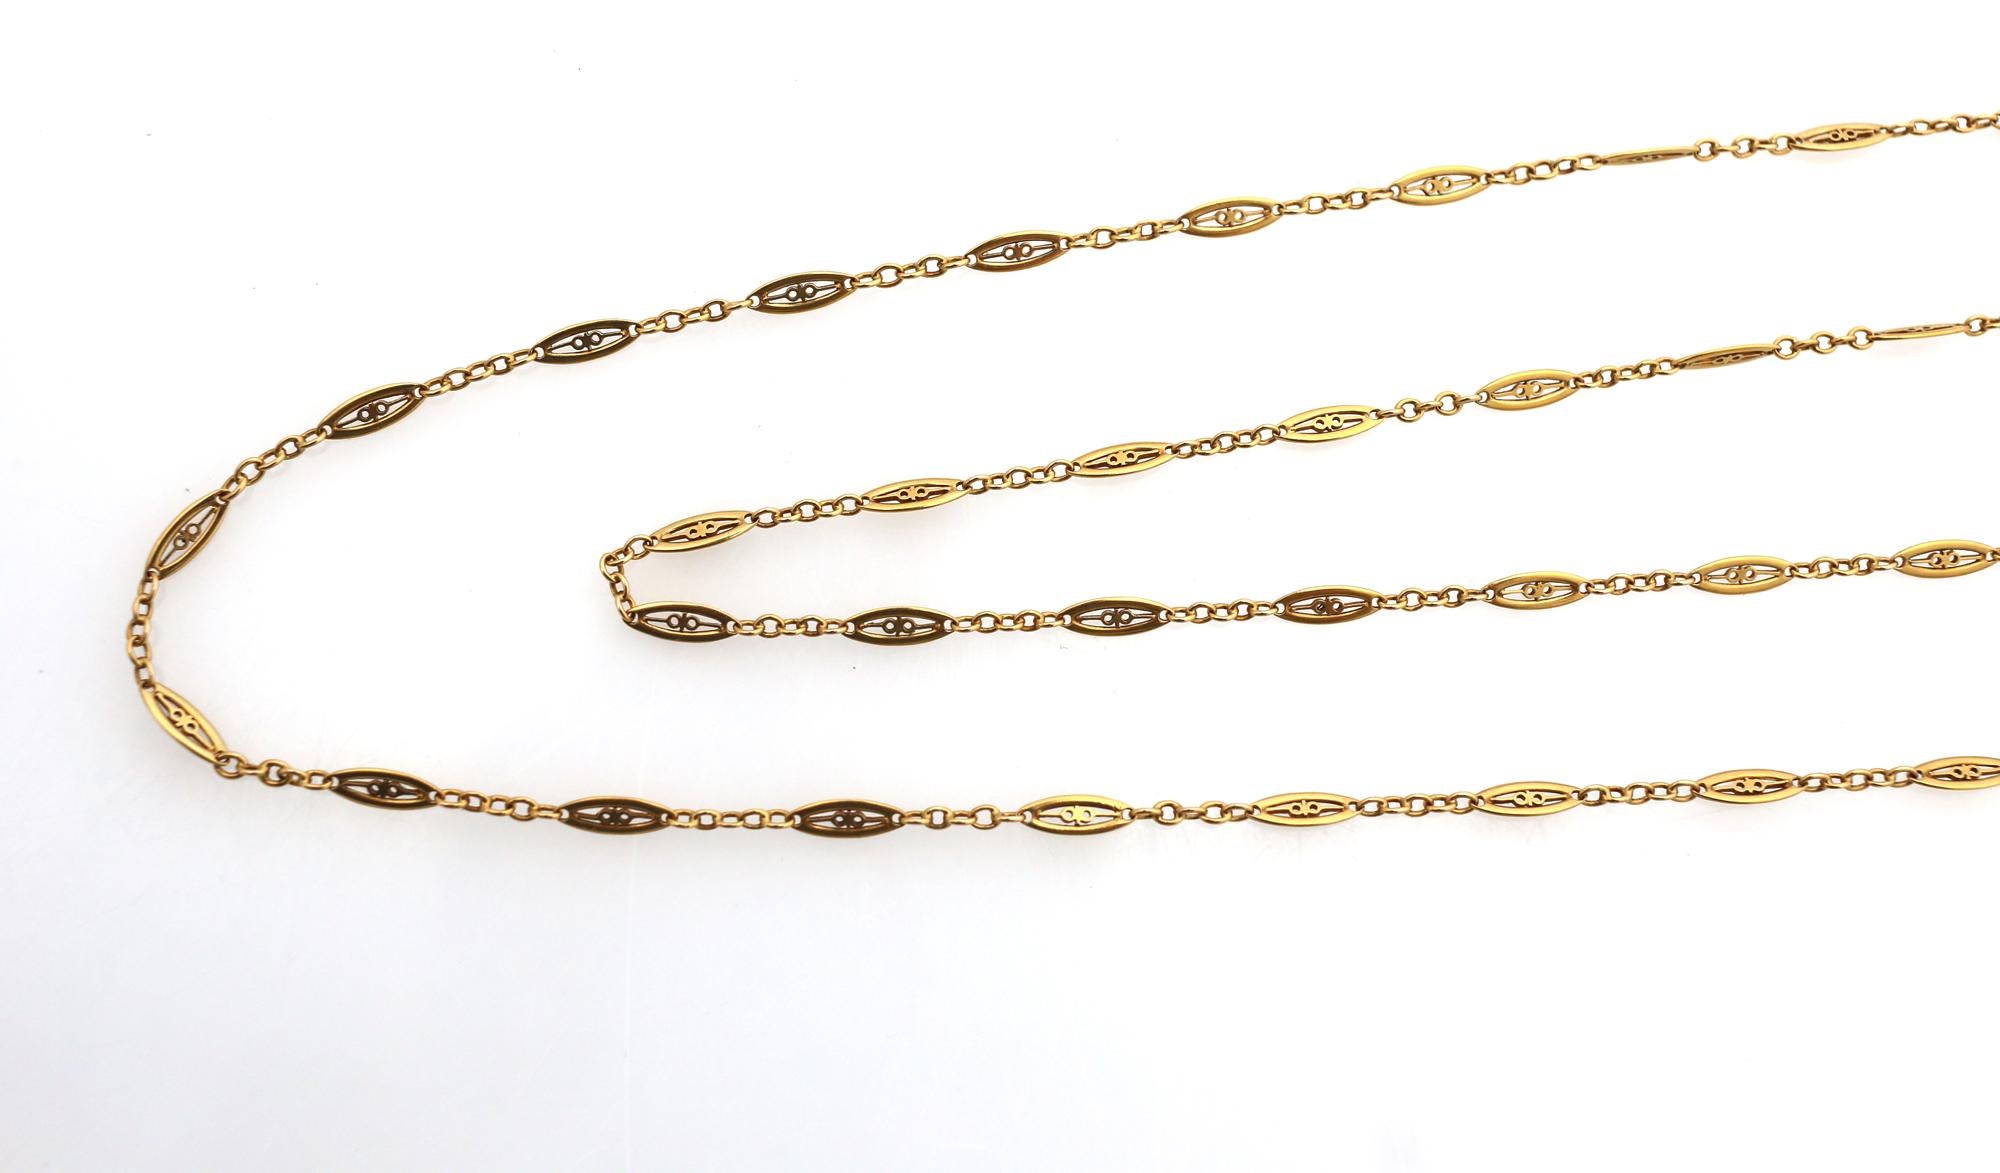 Antique French 18K Yellow Gold Chain Necklace. 1860. Very interesting and rare hand made pattern. A great addition to an antique pendant!
Weight: 25 gr
Length: 77 sm (30 inch)
